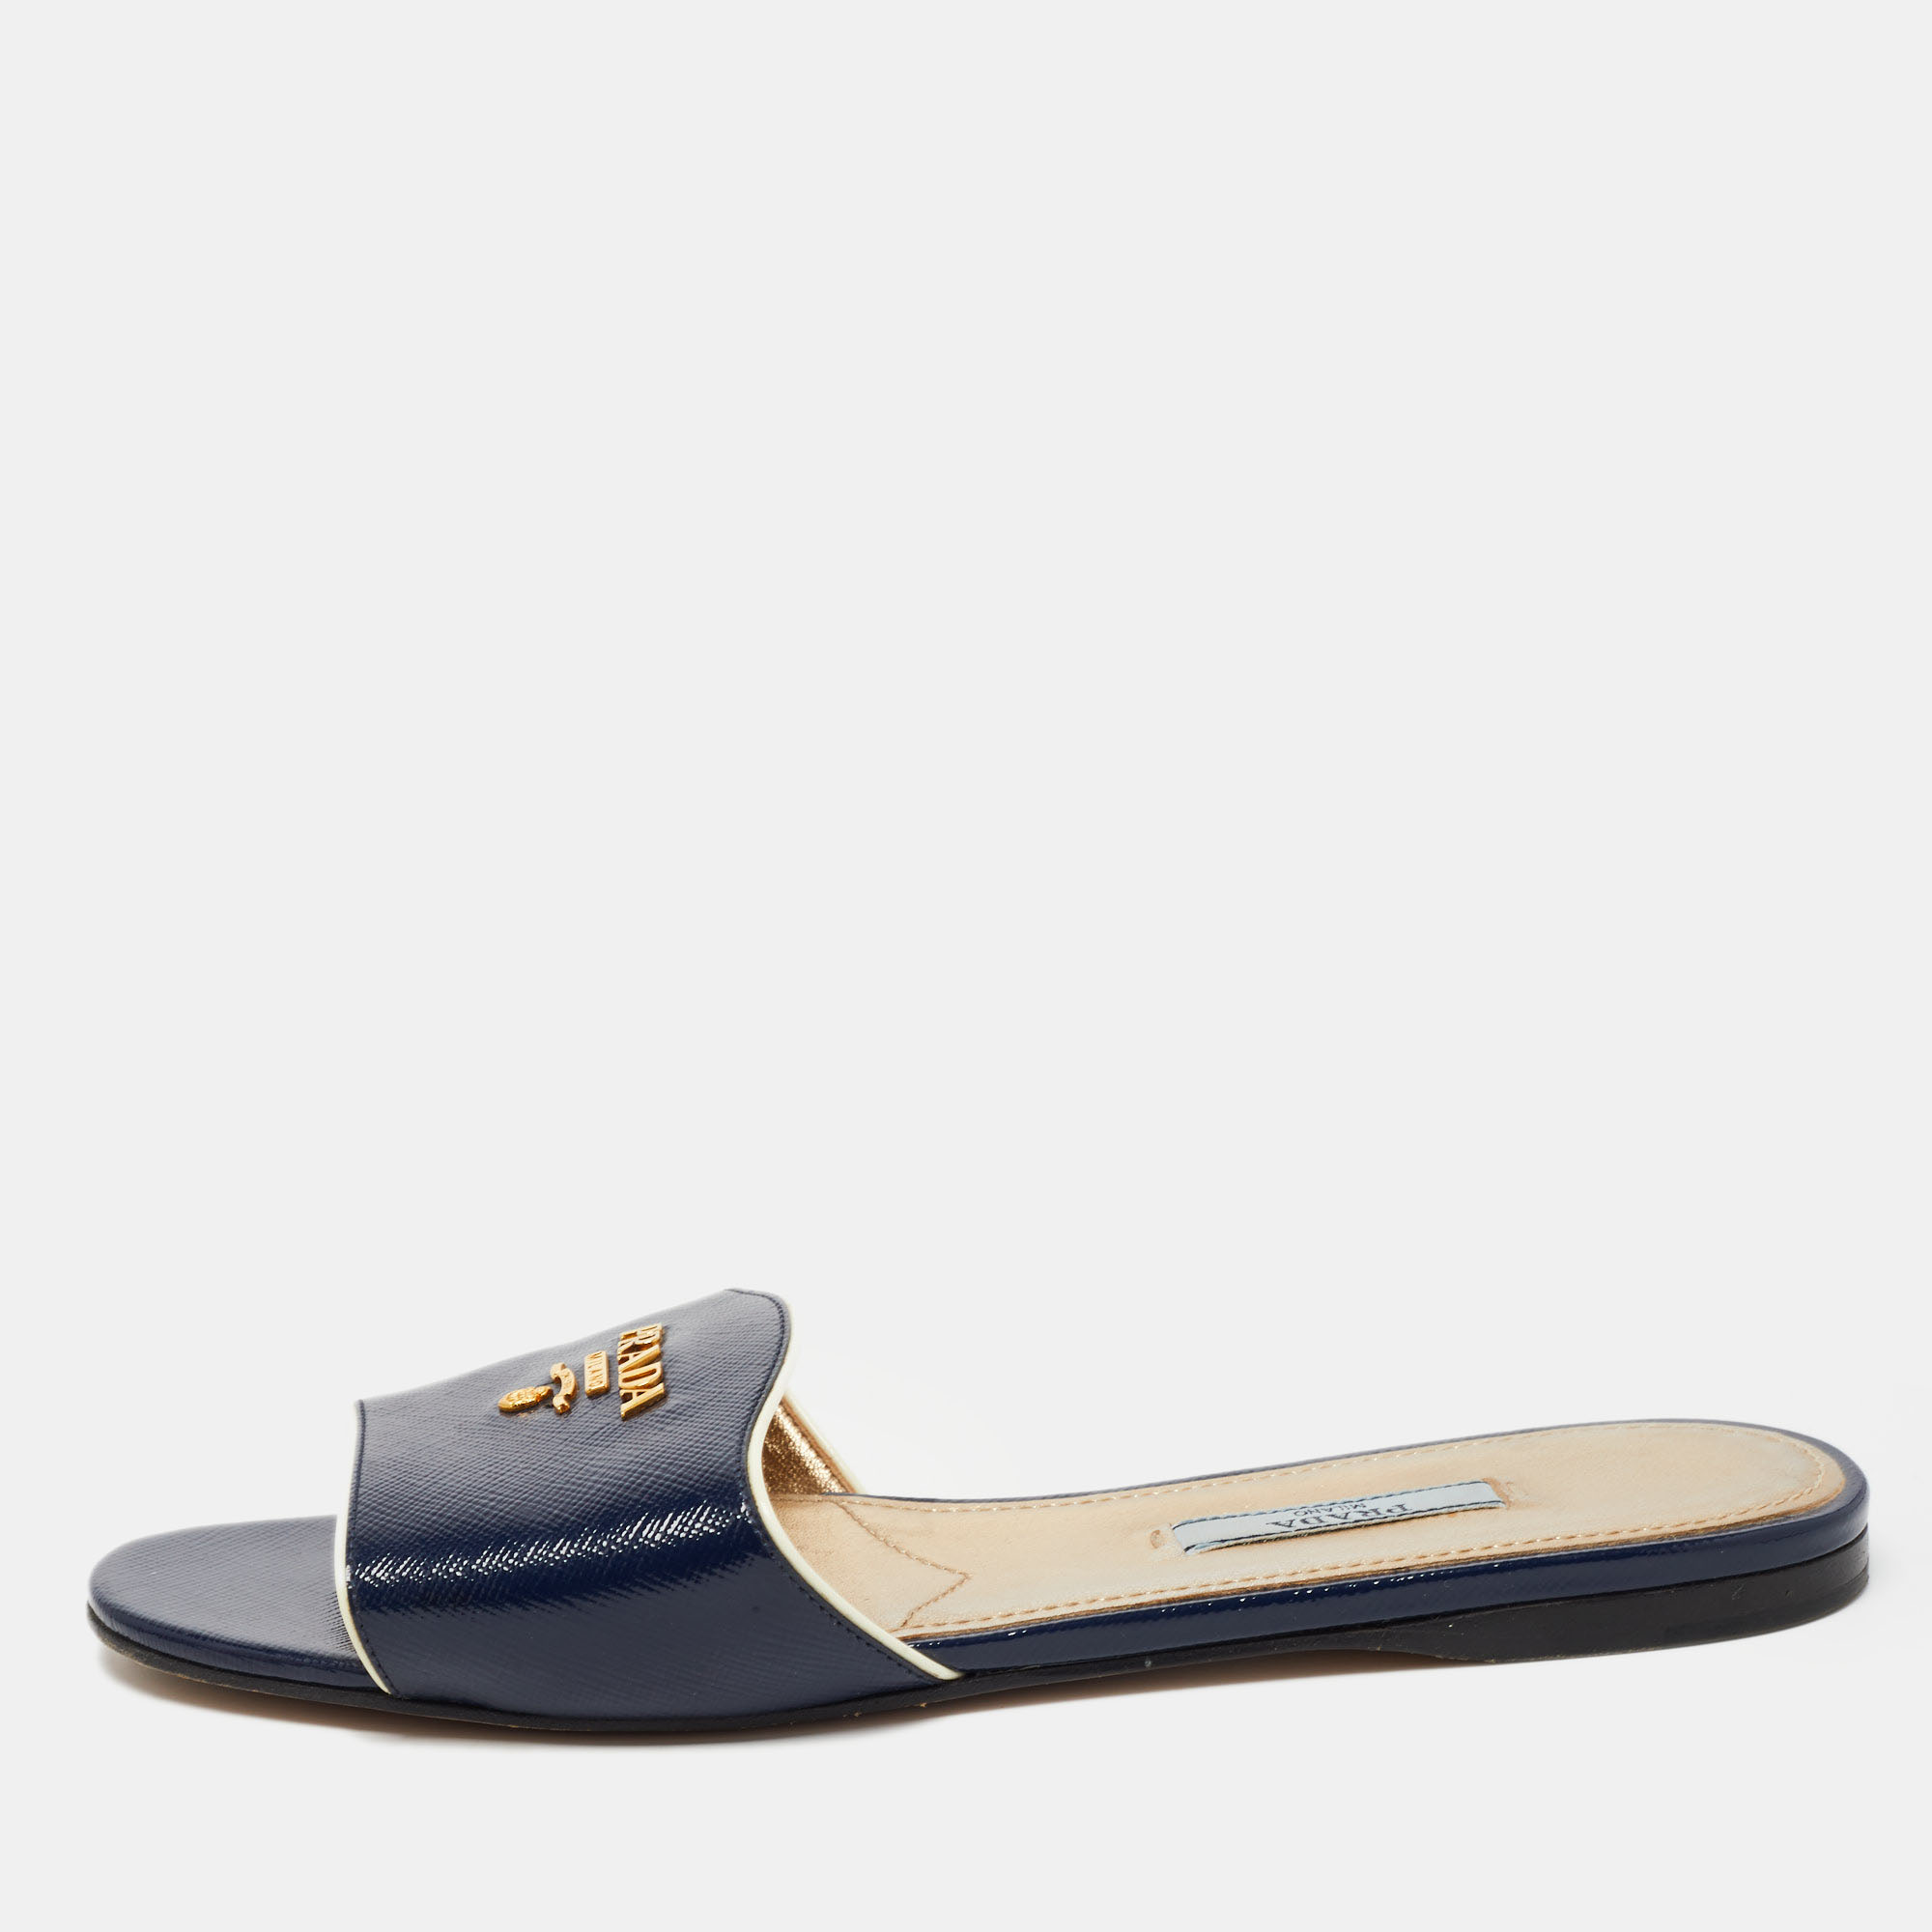 Pre-owned Prada Navy Blue Vernice Saffiano Leather Flat Slides Size 37